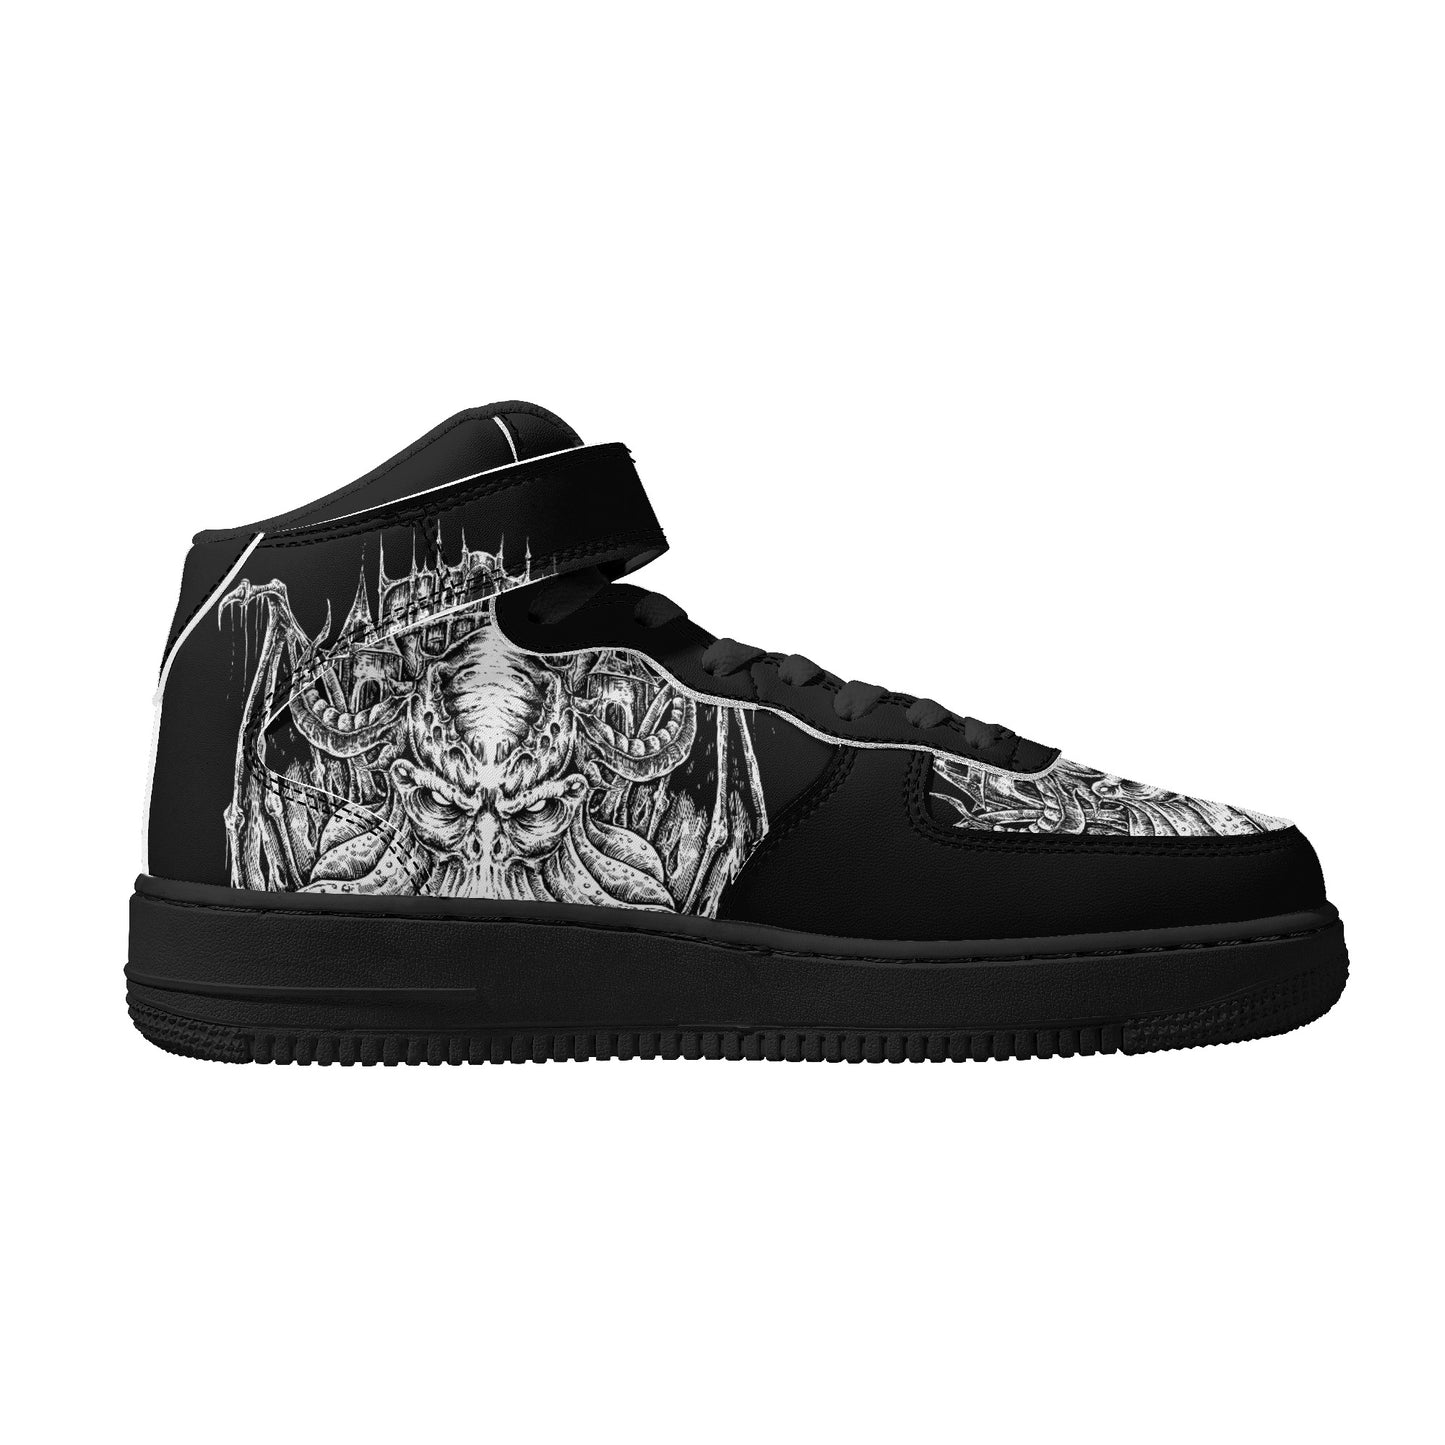 Necro - Cthulhu Blk/Wht - Men's High Top Leather Sneakers